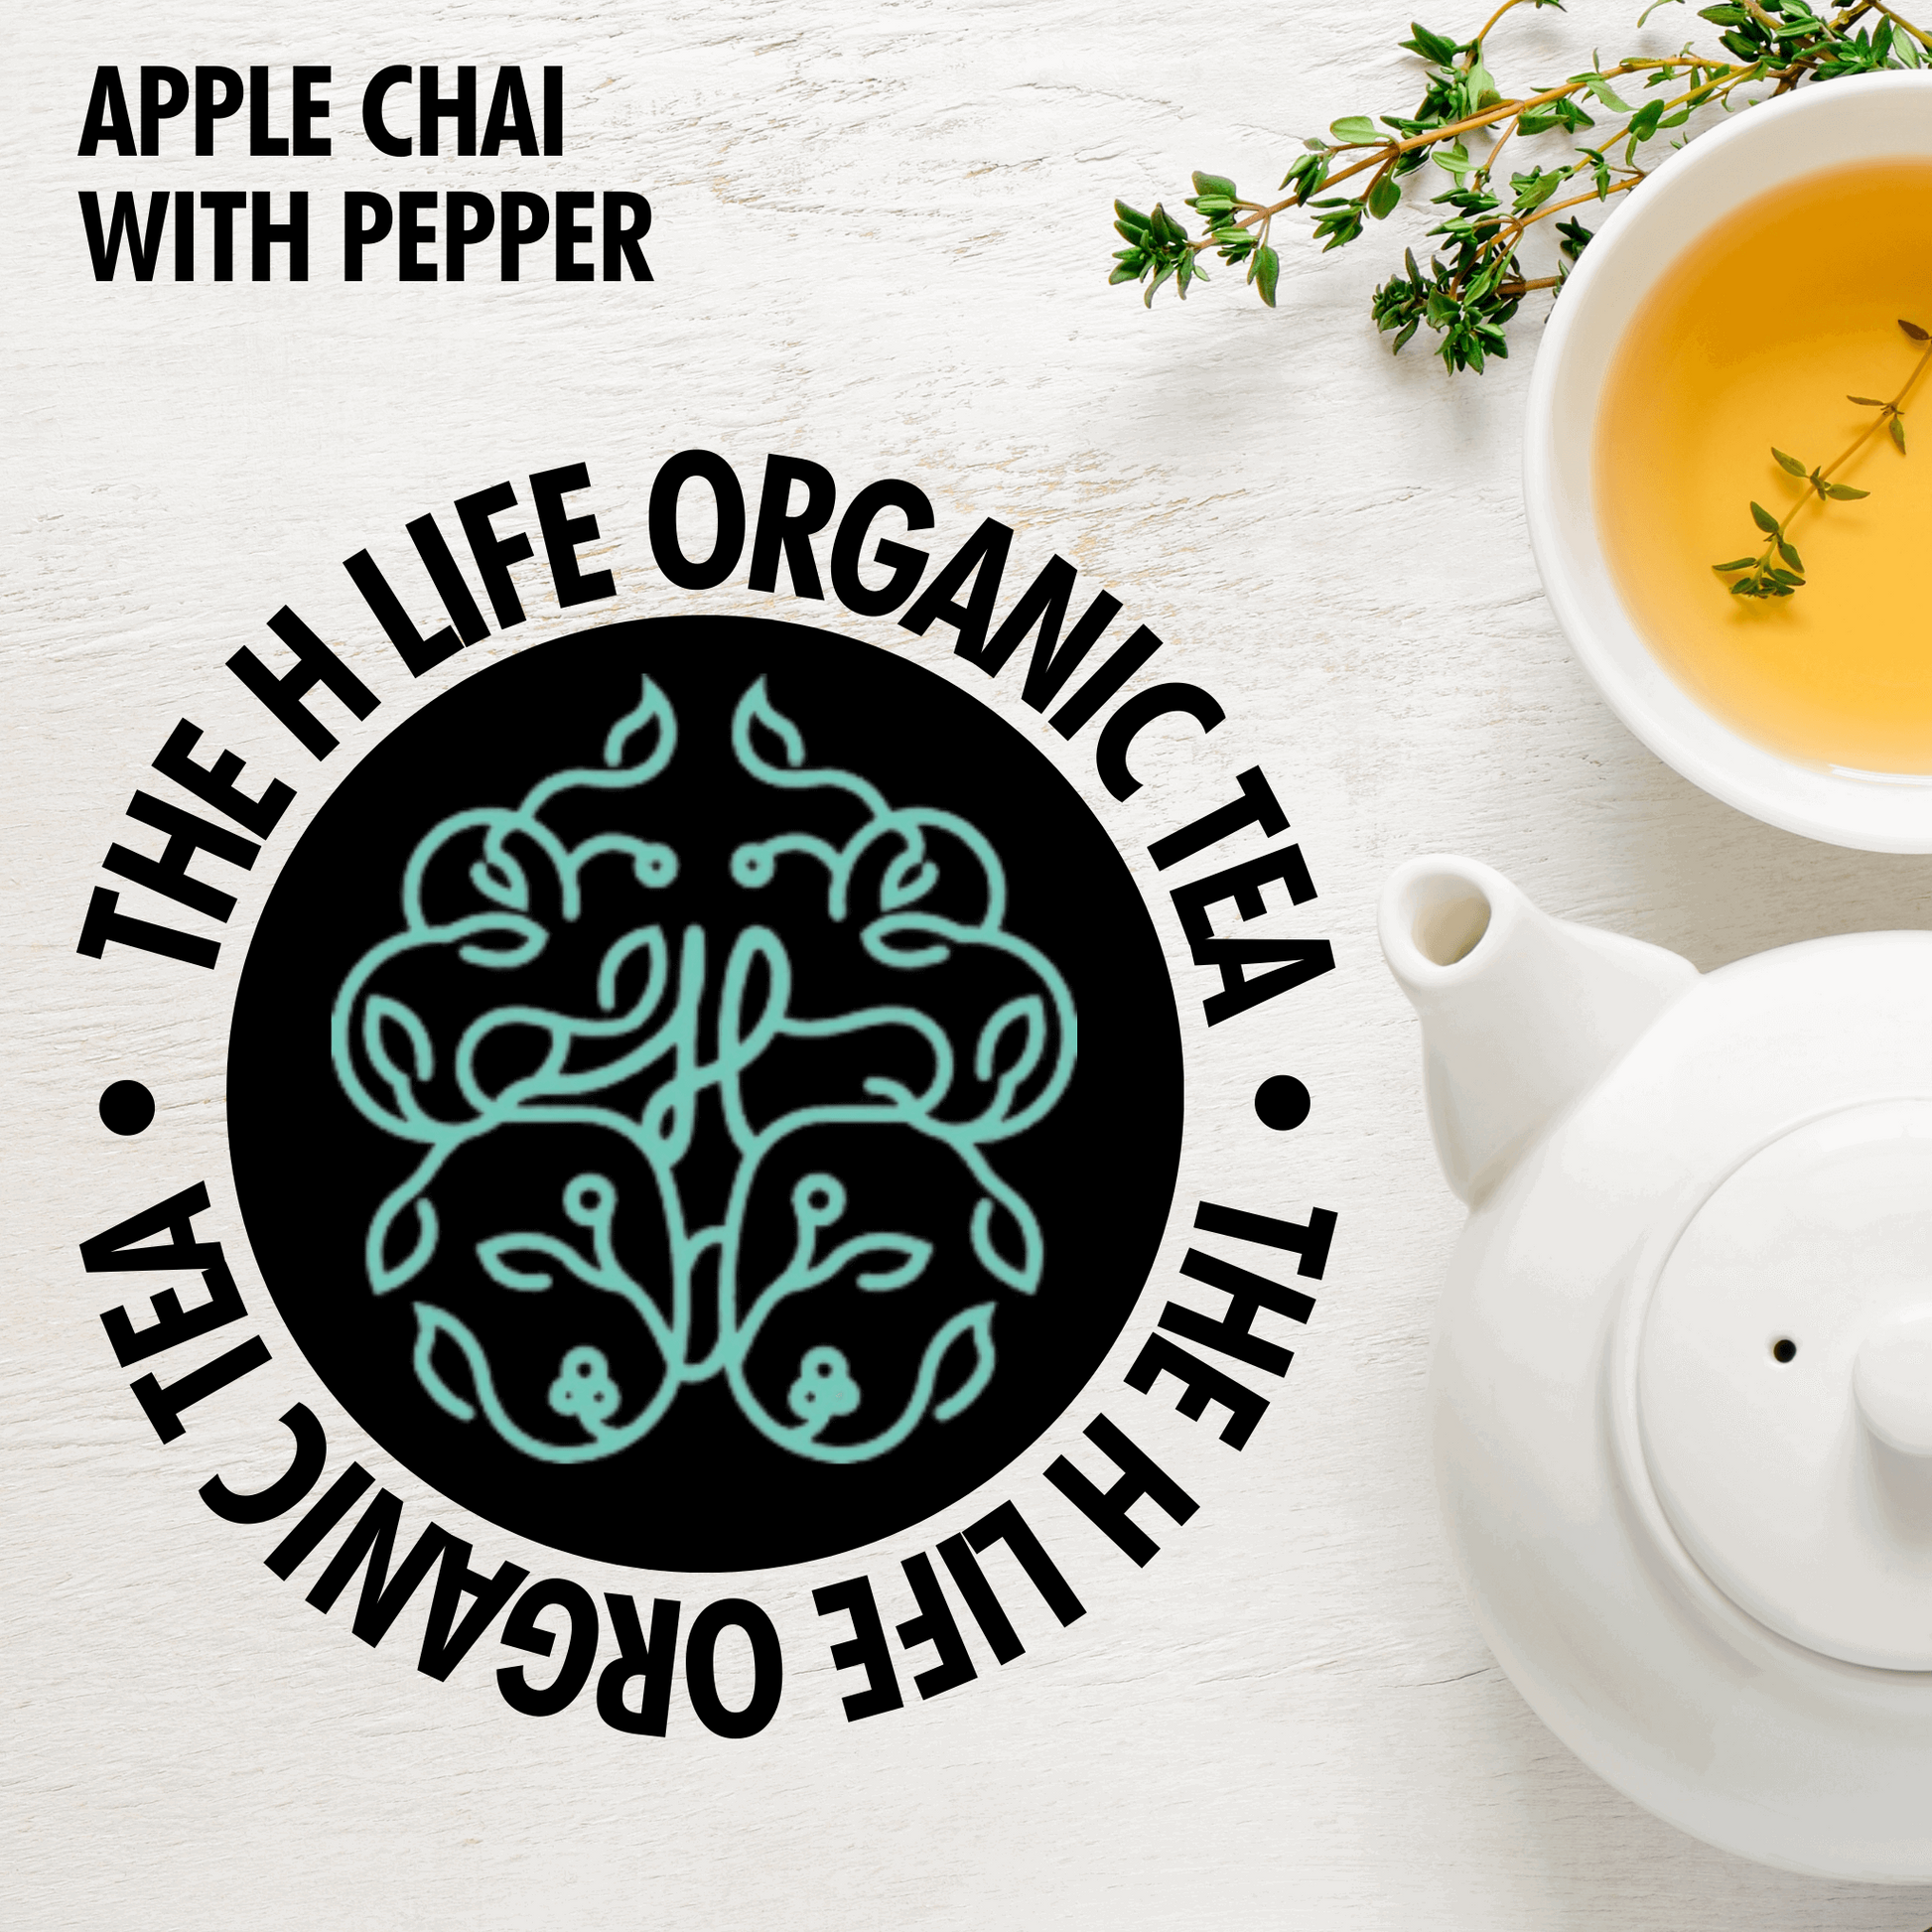 Apple Chai with Pepper